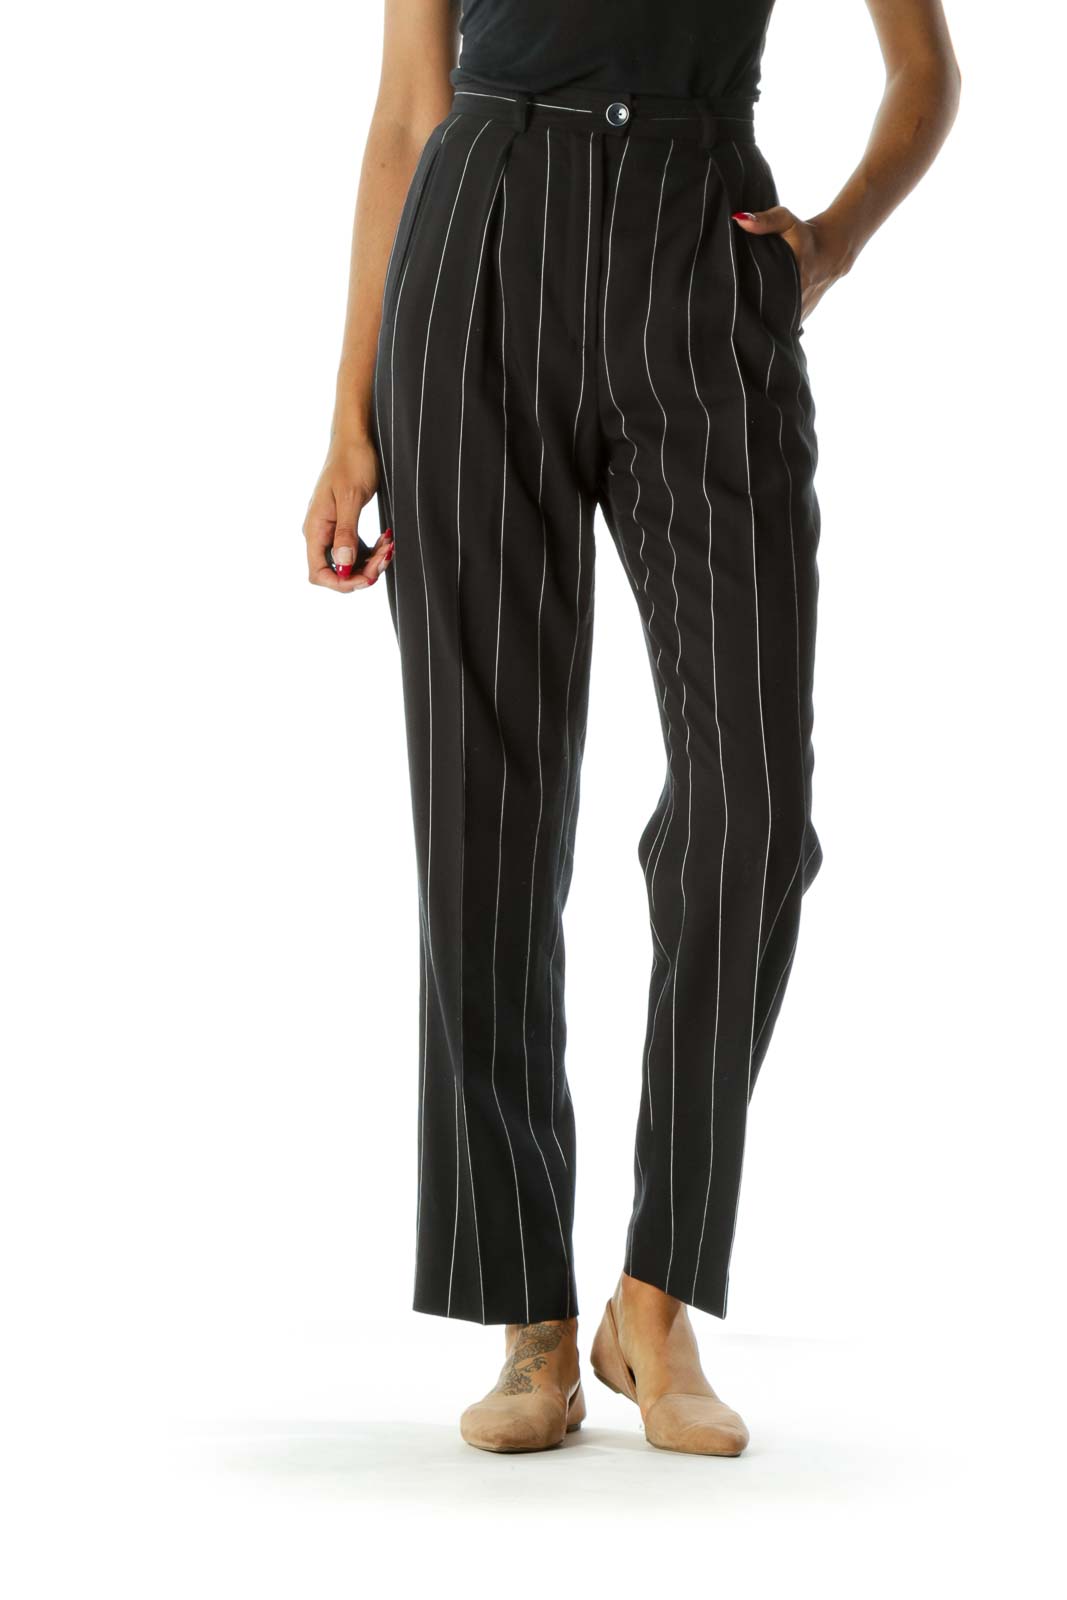 Navy & White Pinstripe 100% Pure Wool Designer High-Waisted Pants Front